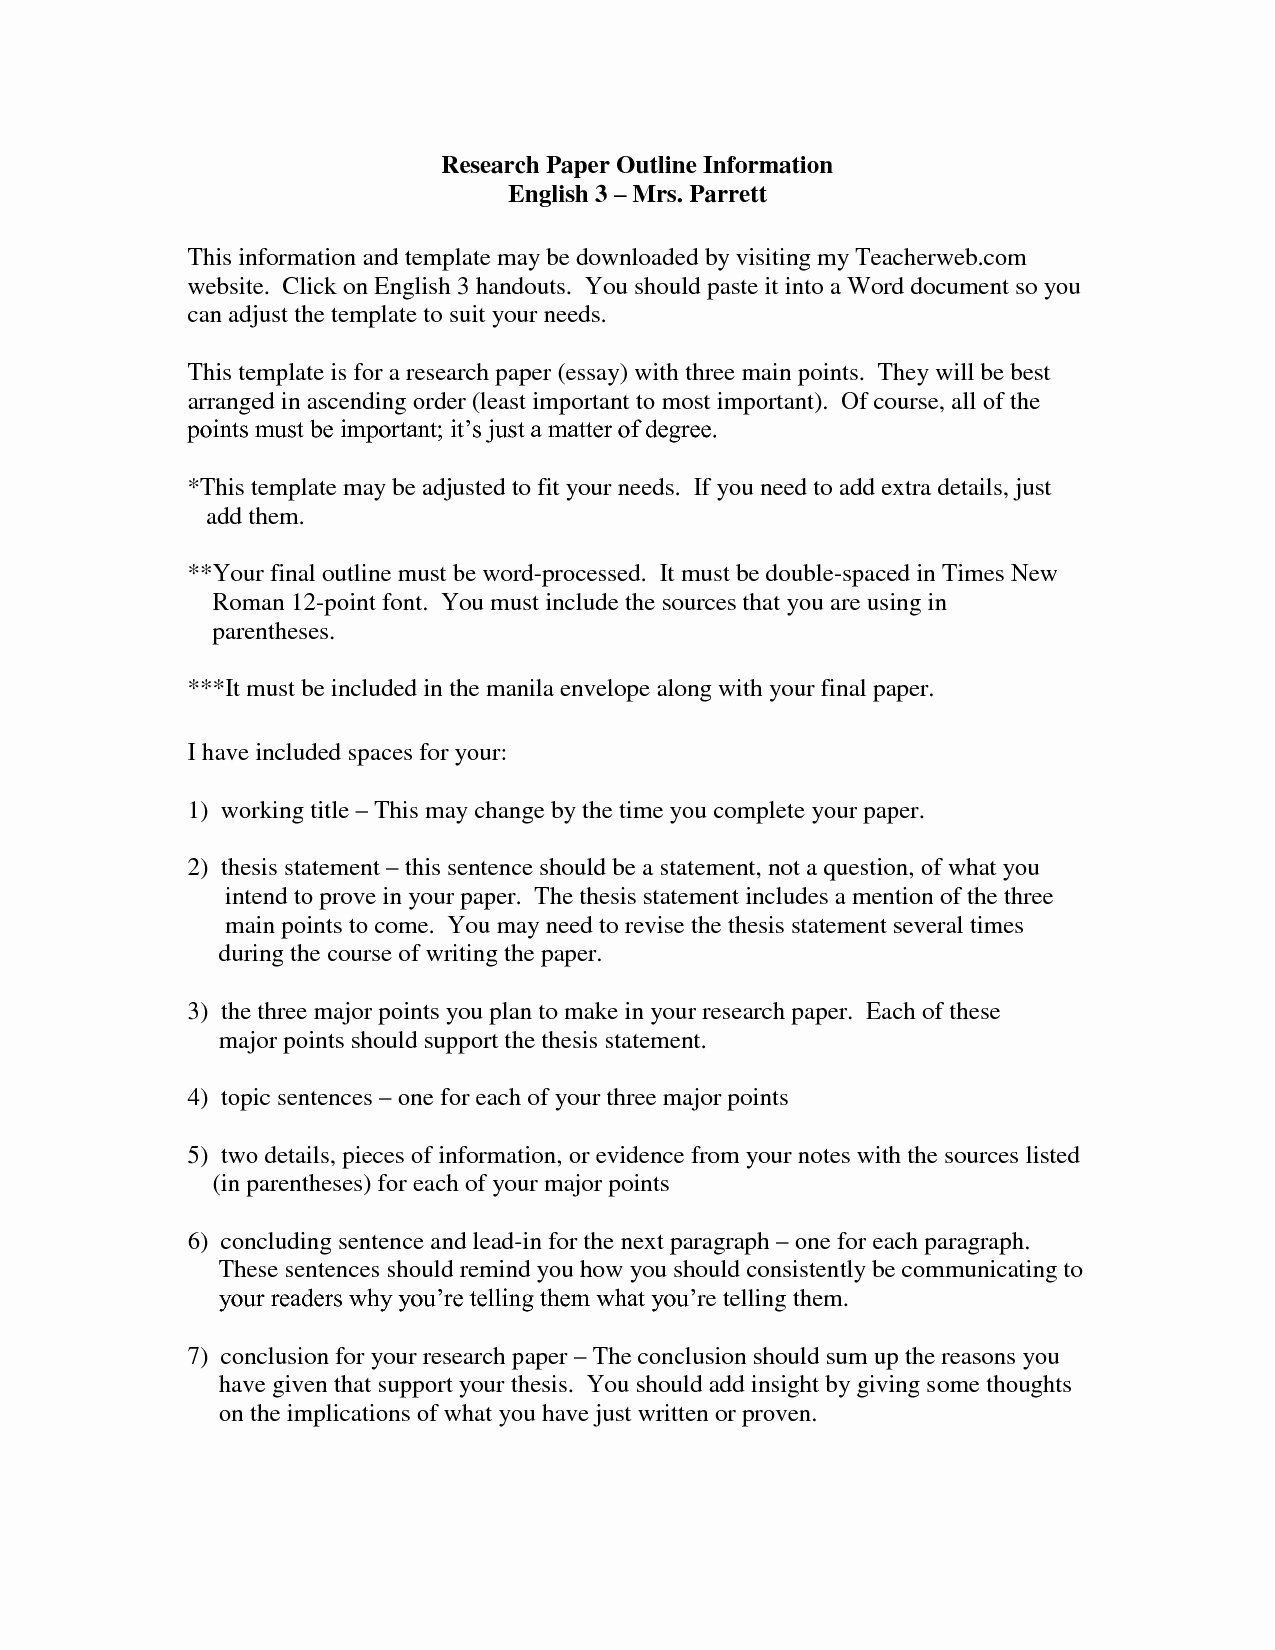 Sample Outlines for Research Papers Lovely Research Essay Outline Example